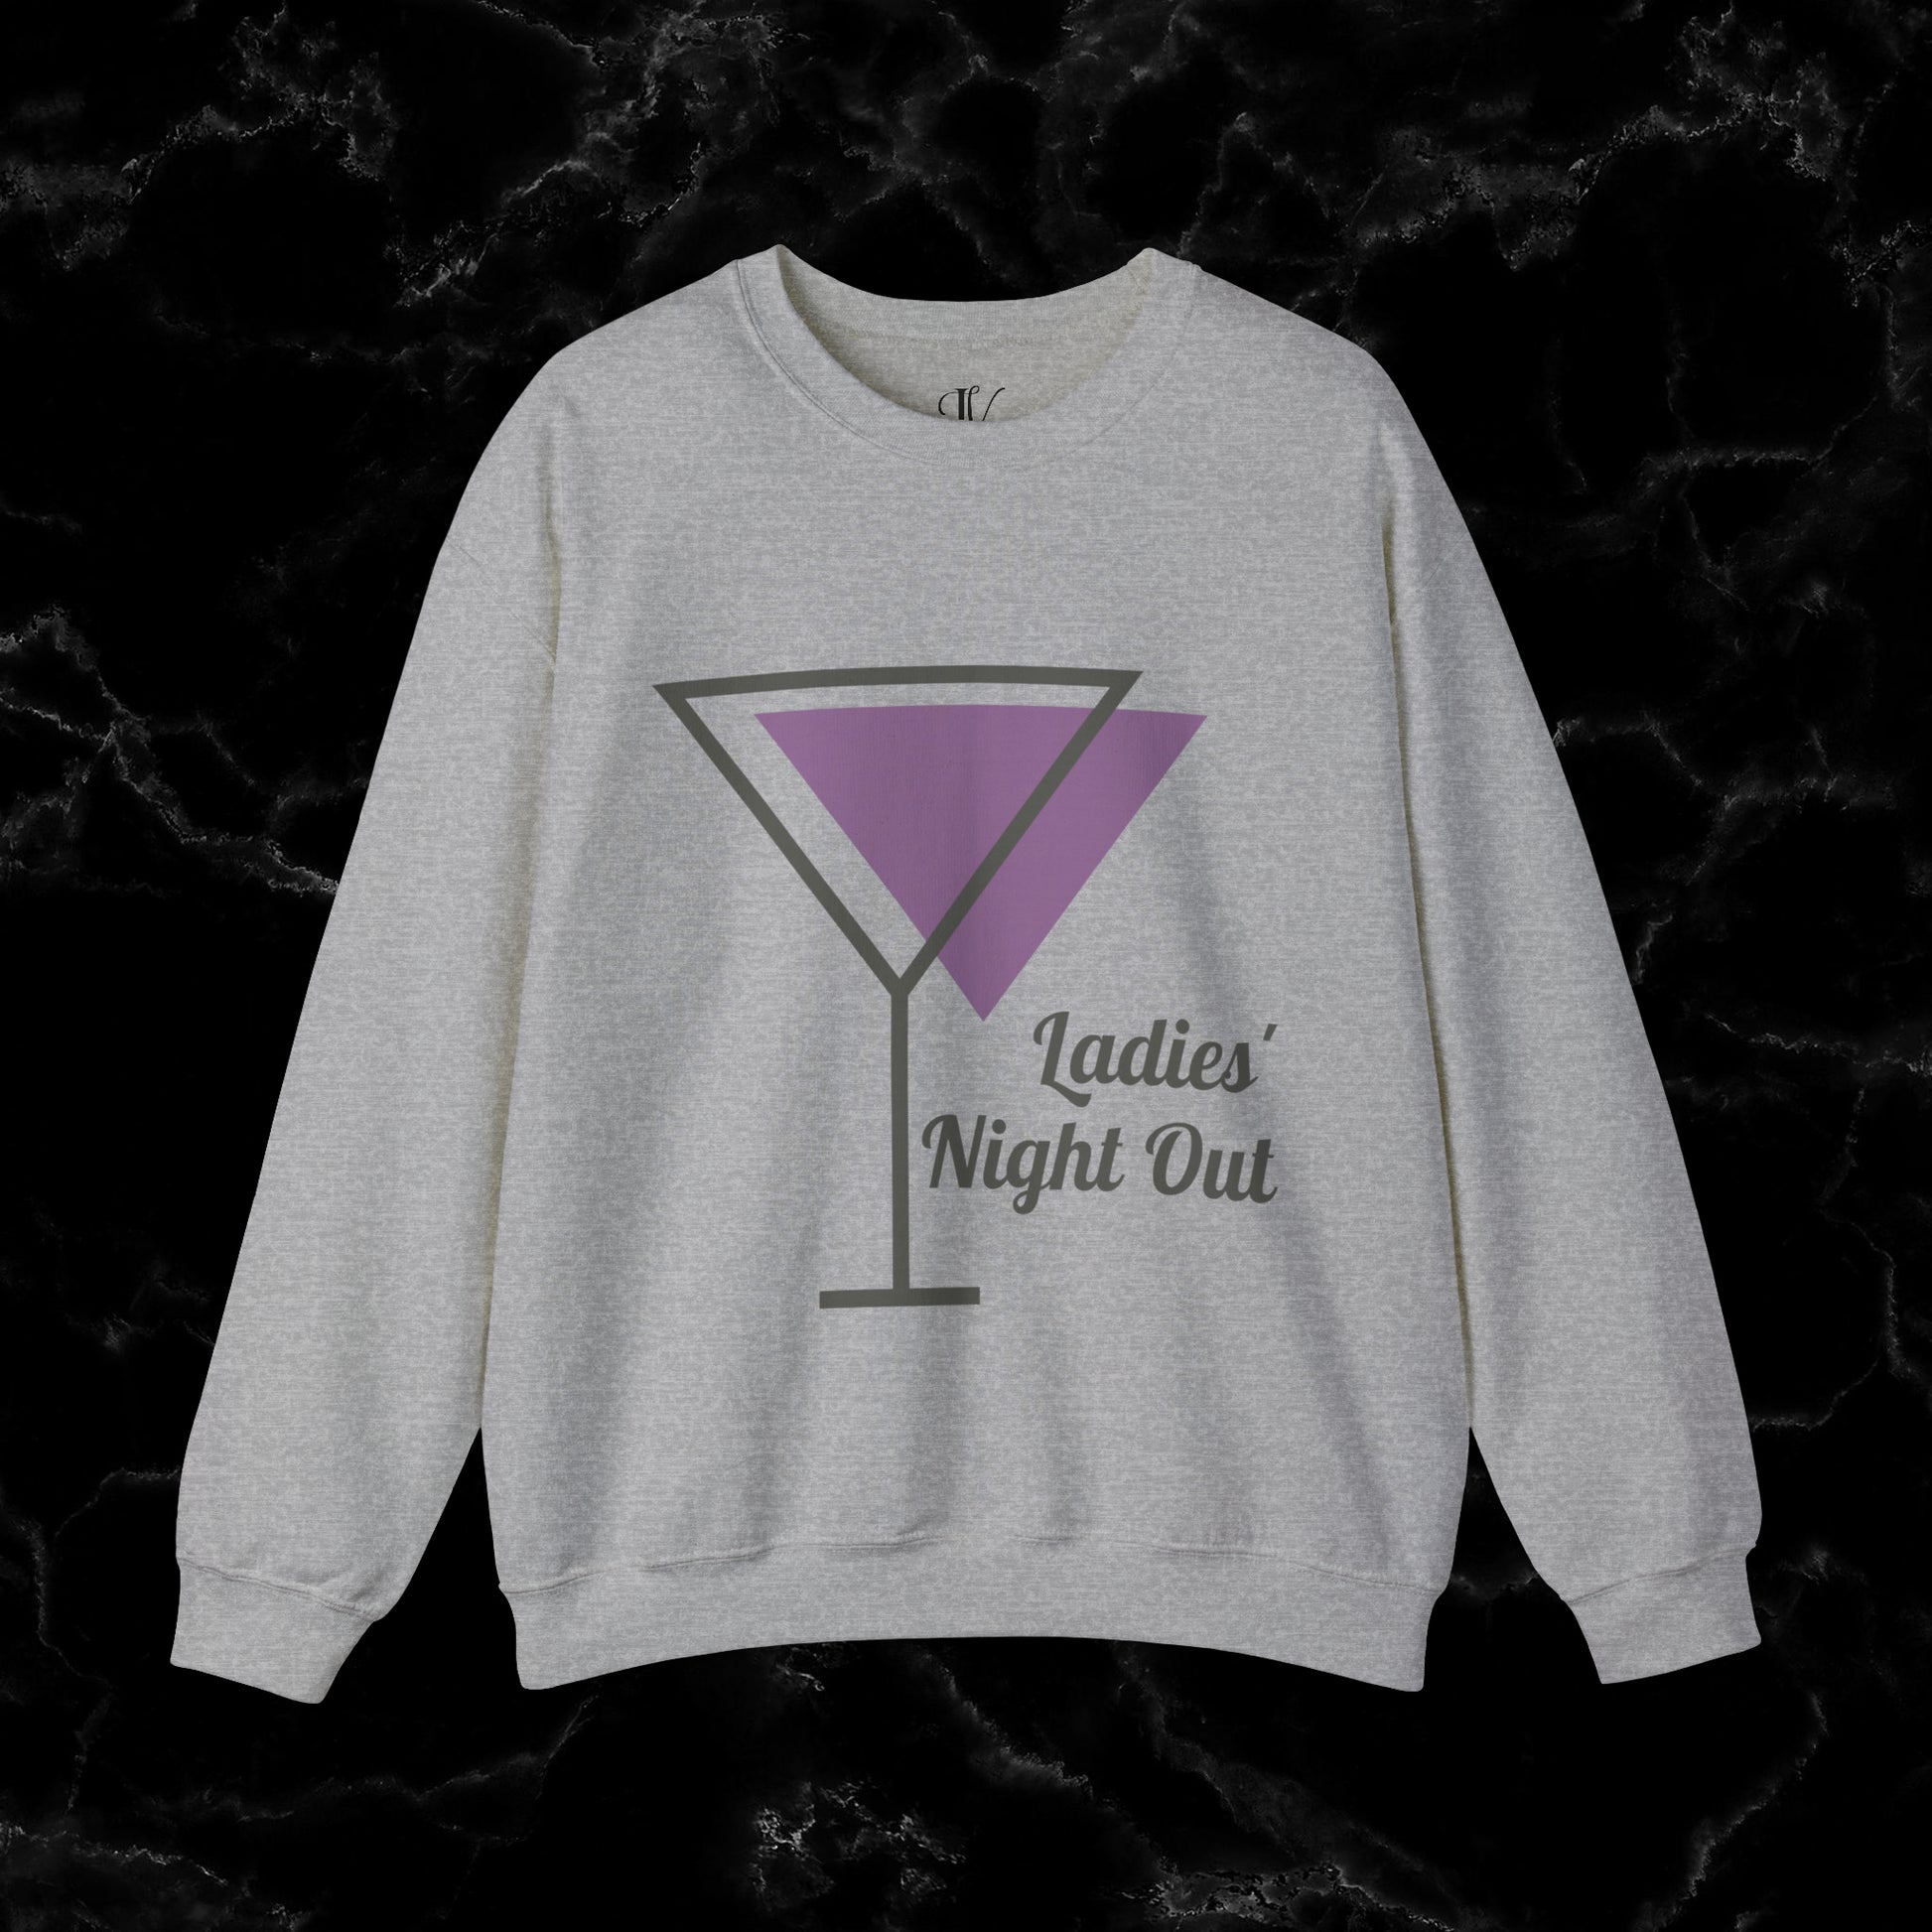 Ladies' Night Out - Dirty Martini Social Club Sweatshirt - Elevate Your Night Out with Style and Sass in this Chic and Comfortable Sweatshirt! Sweatshirt S Sport Grey 